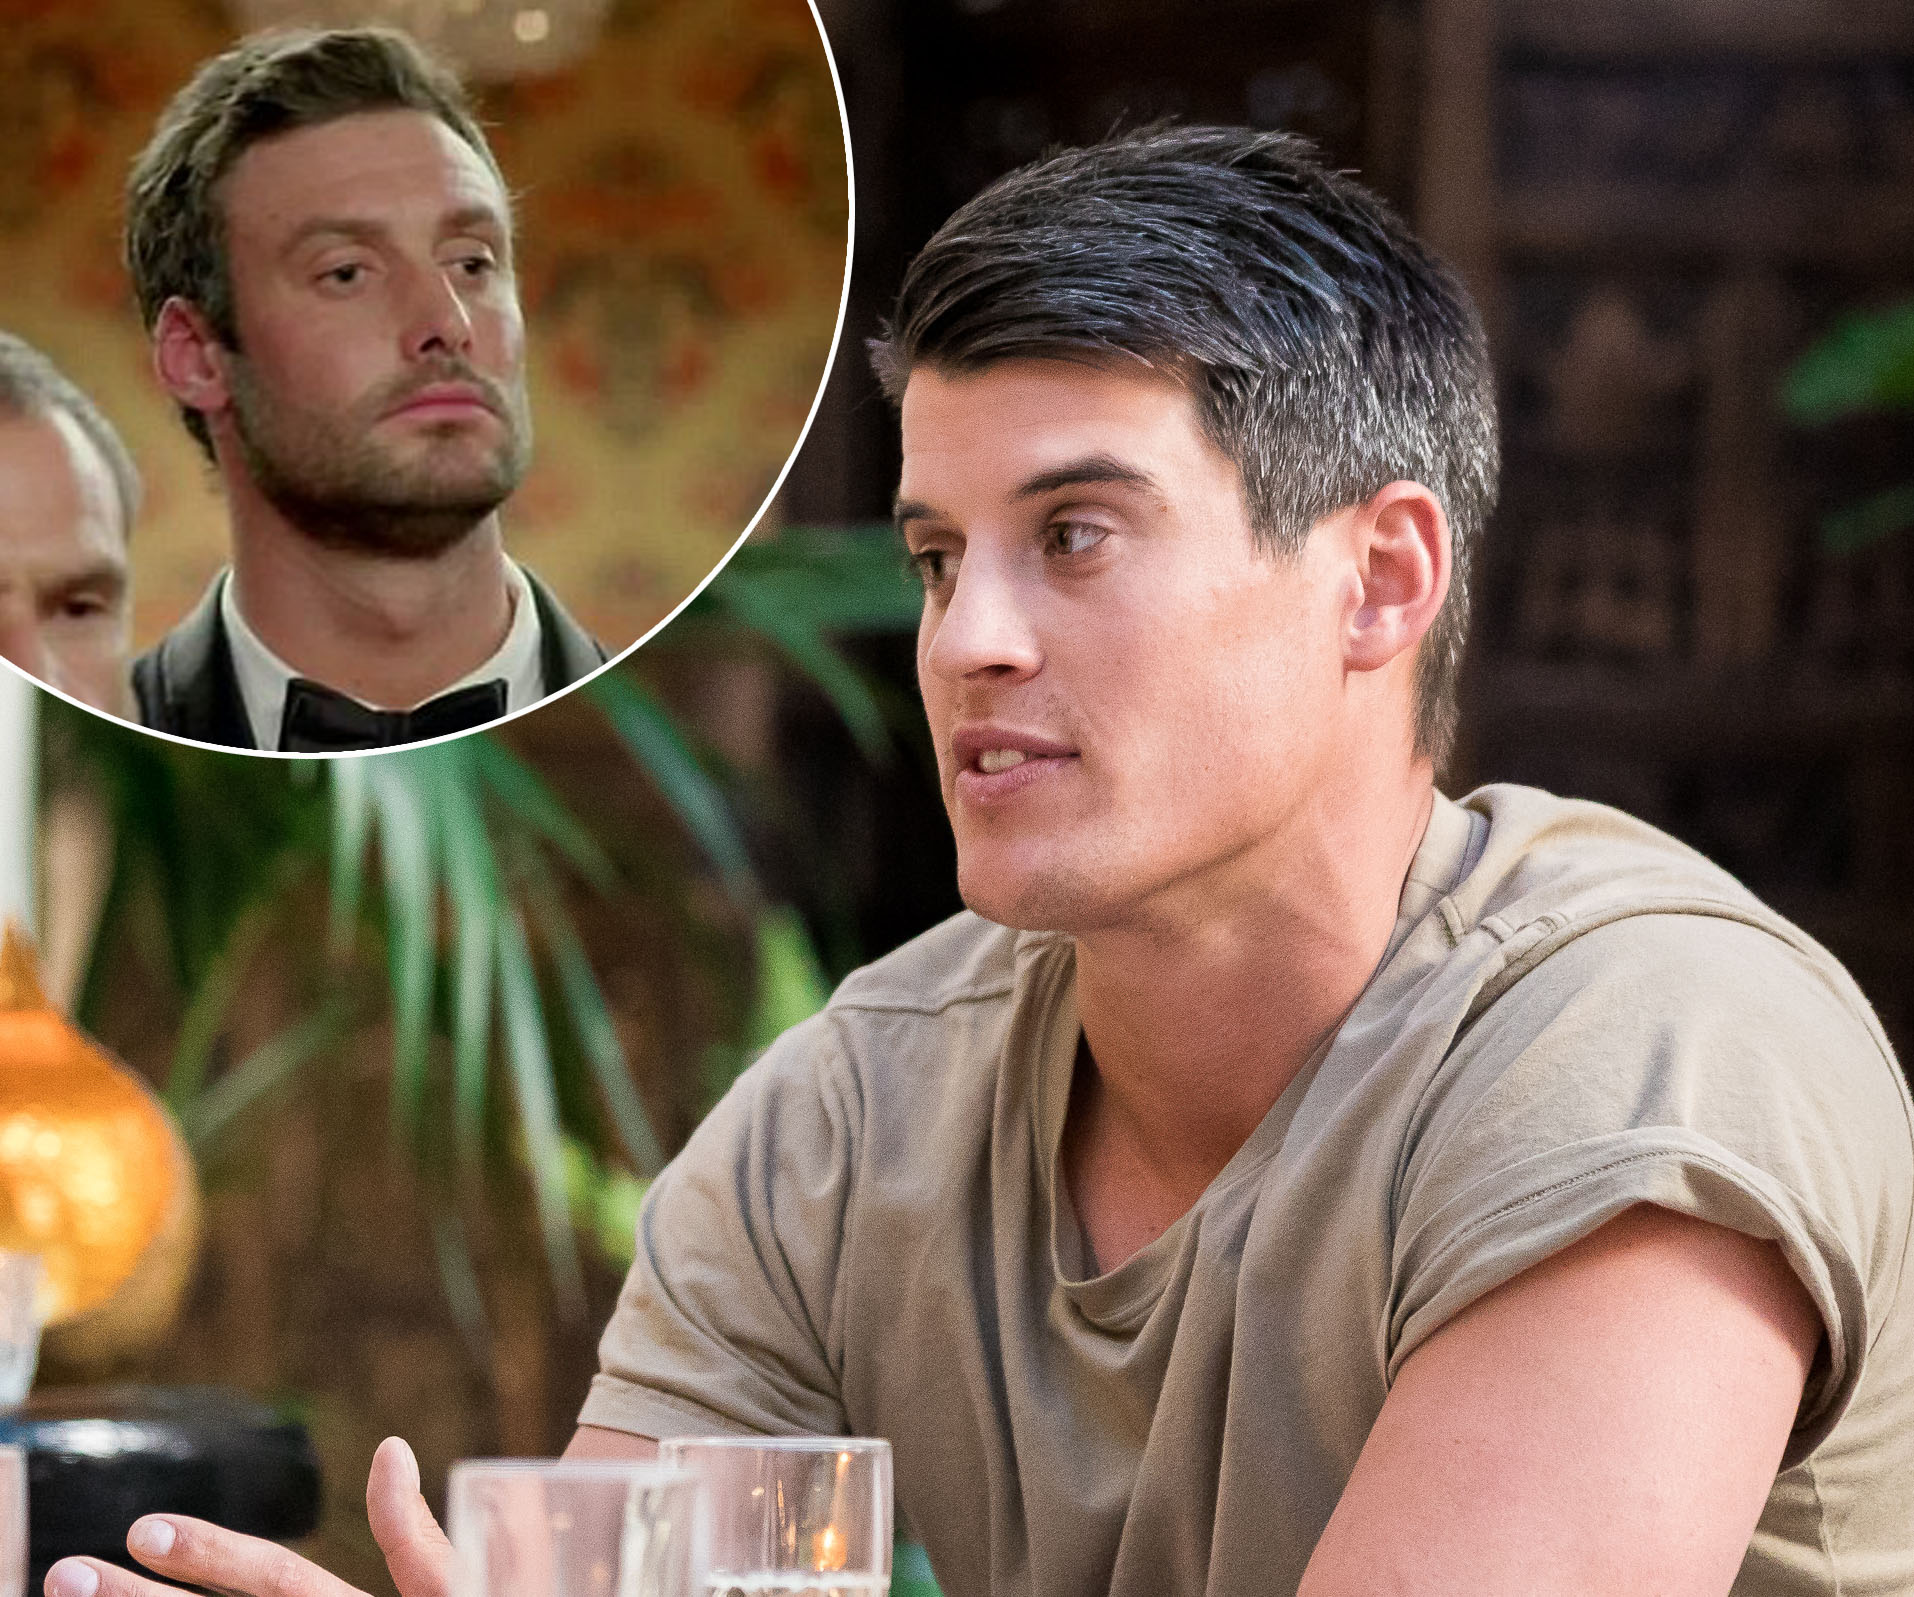 EXCLUSIVE: The Bachelorette’s Charlie and Bill’s feud has apparently moved to the bedroom